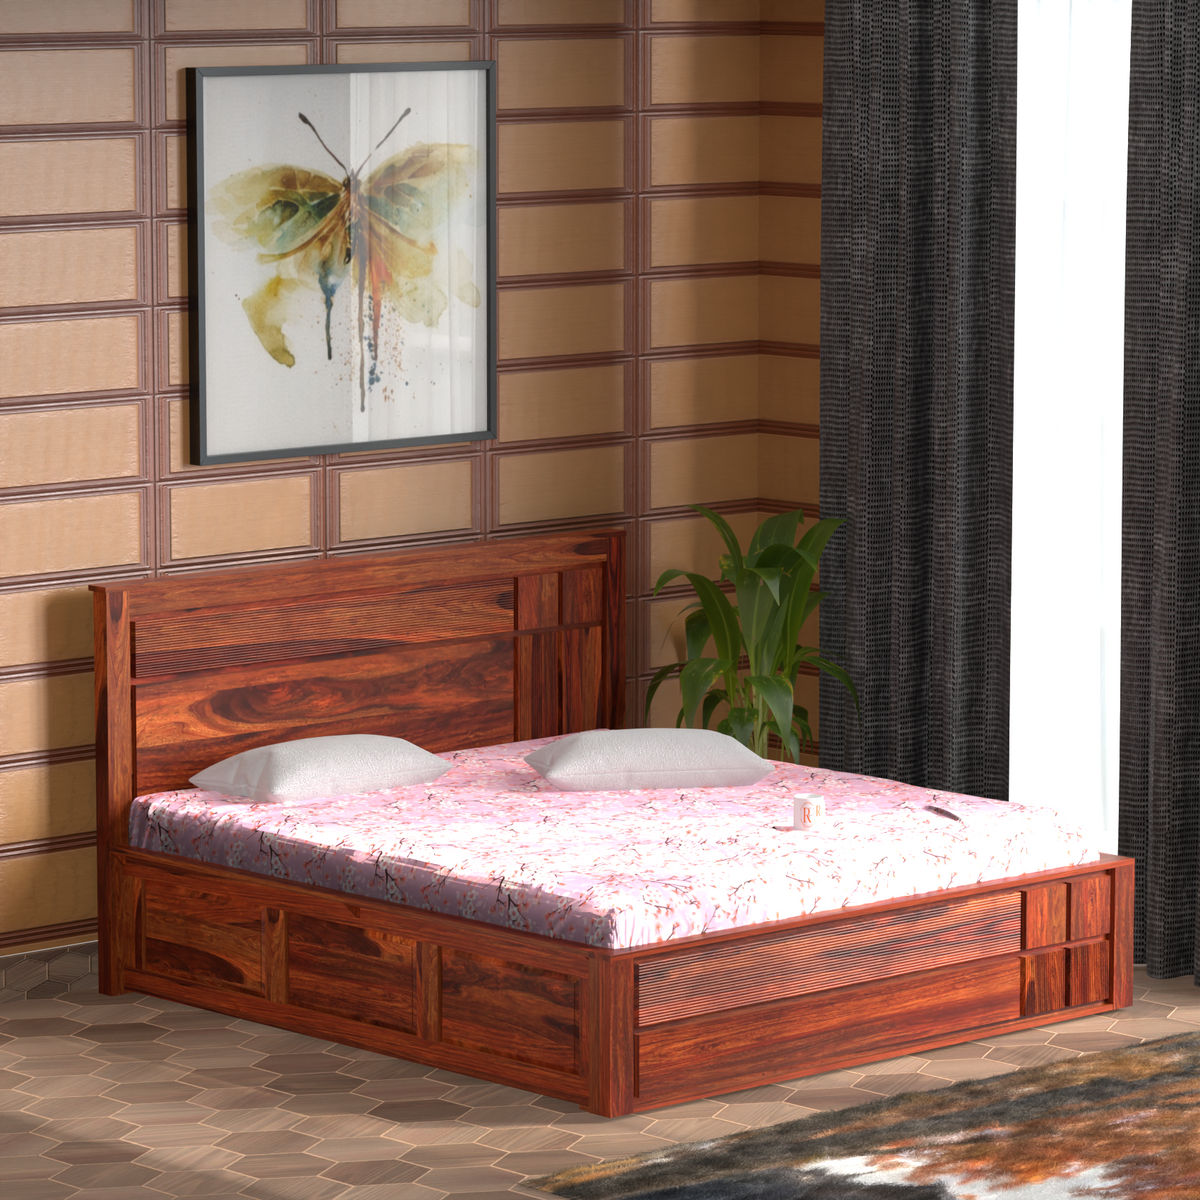 Mattson Solid Wood Queen Size Double Bed with Box Storage in Honey Oak Finish